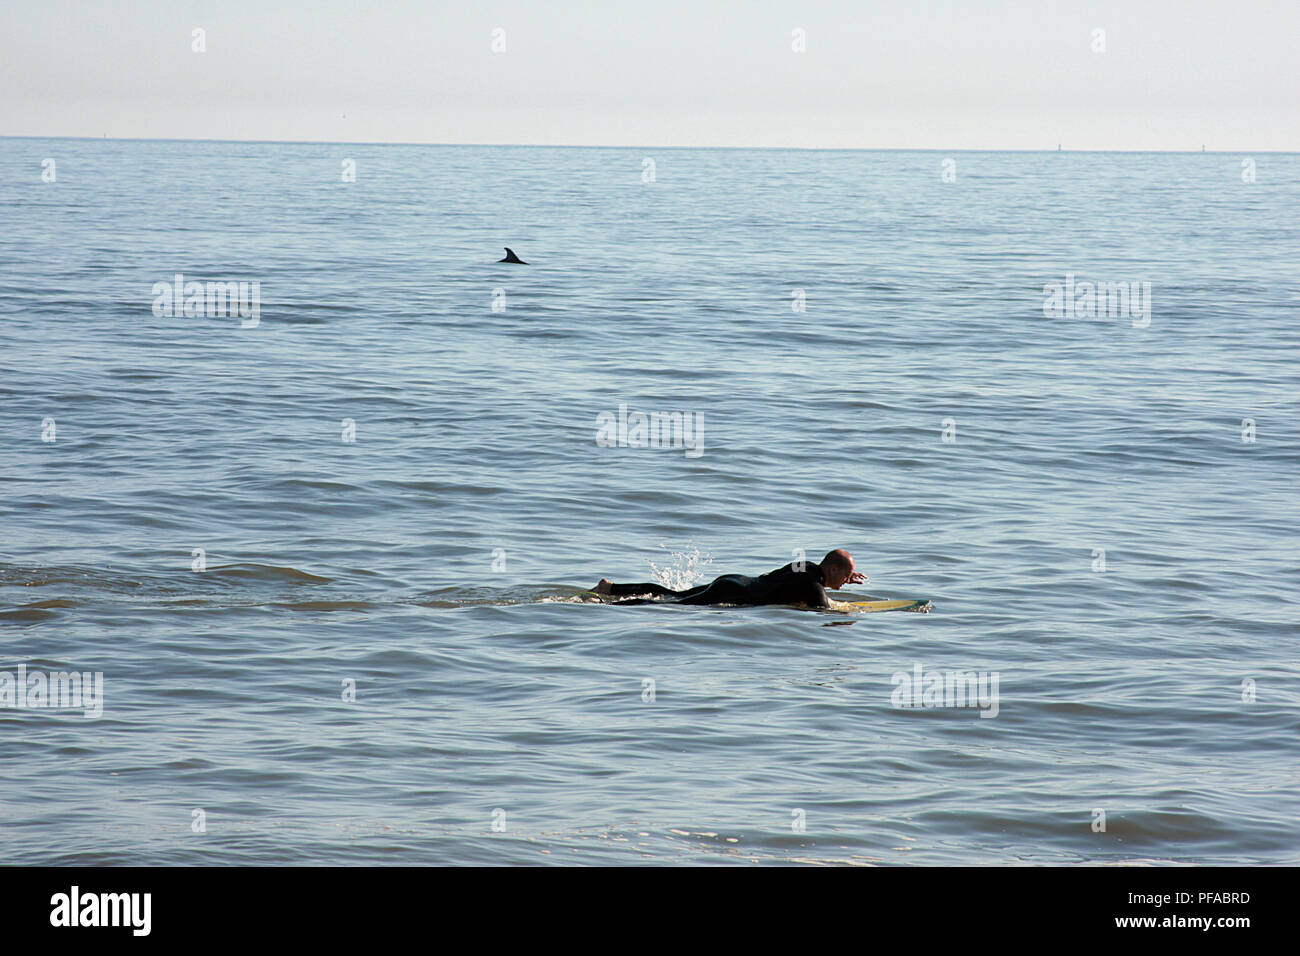 Man swimming on surfboard, with dolphins in proximity Stock Photo